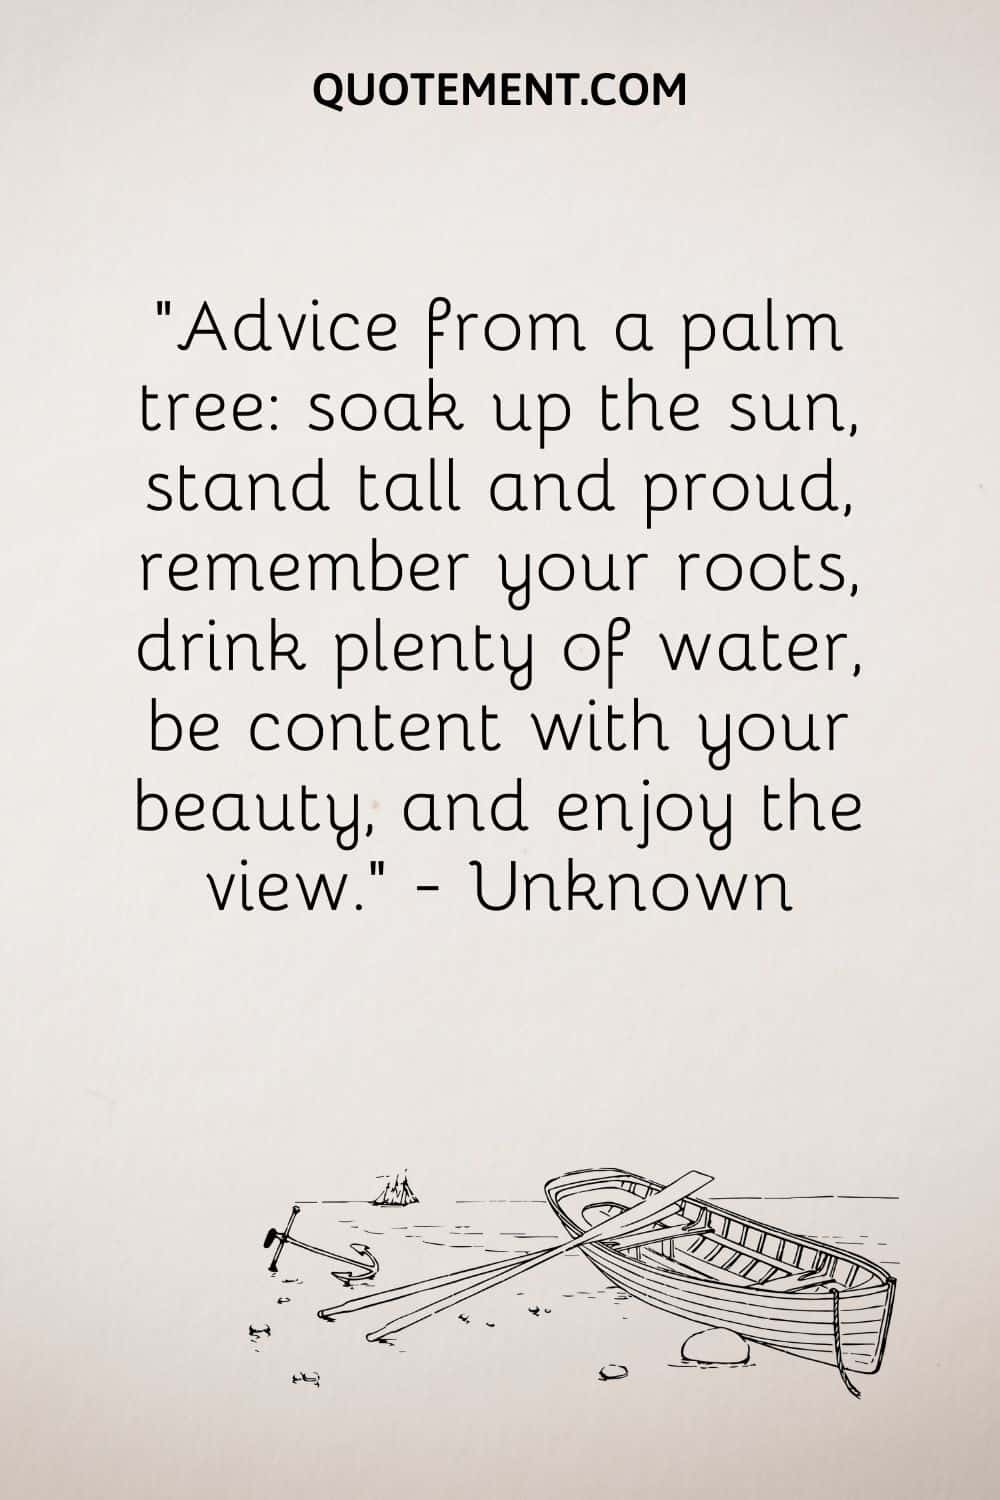 Advice from a palm tree soak up the sun, stand tall and proud, remember your roots, drink plenty of water, be content with your beauty, and enjoy the view. — Unknown